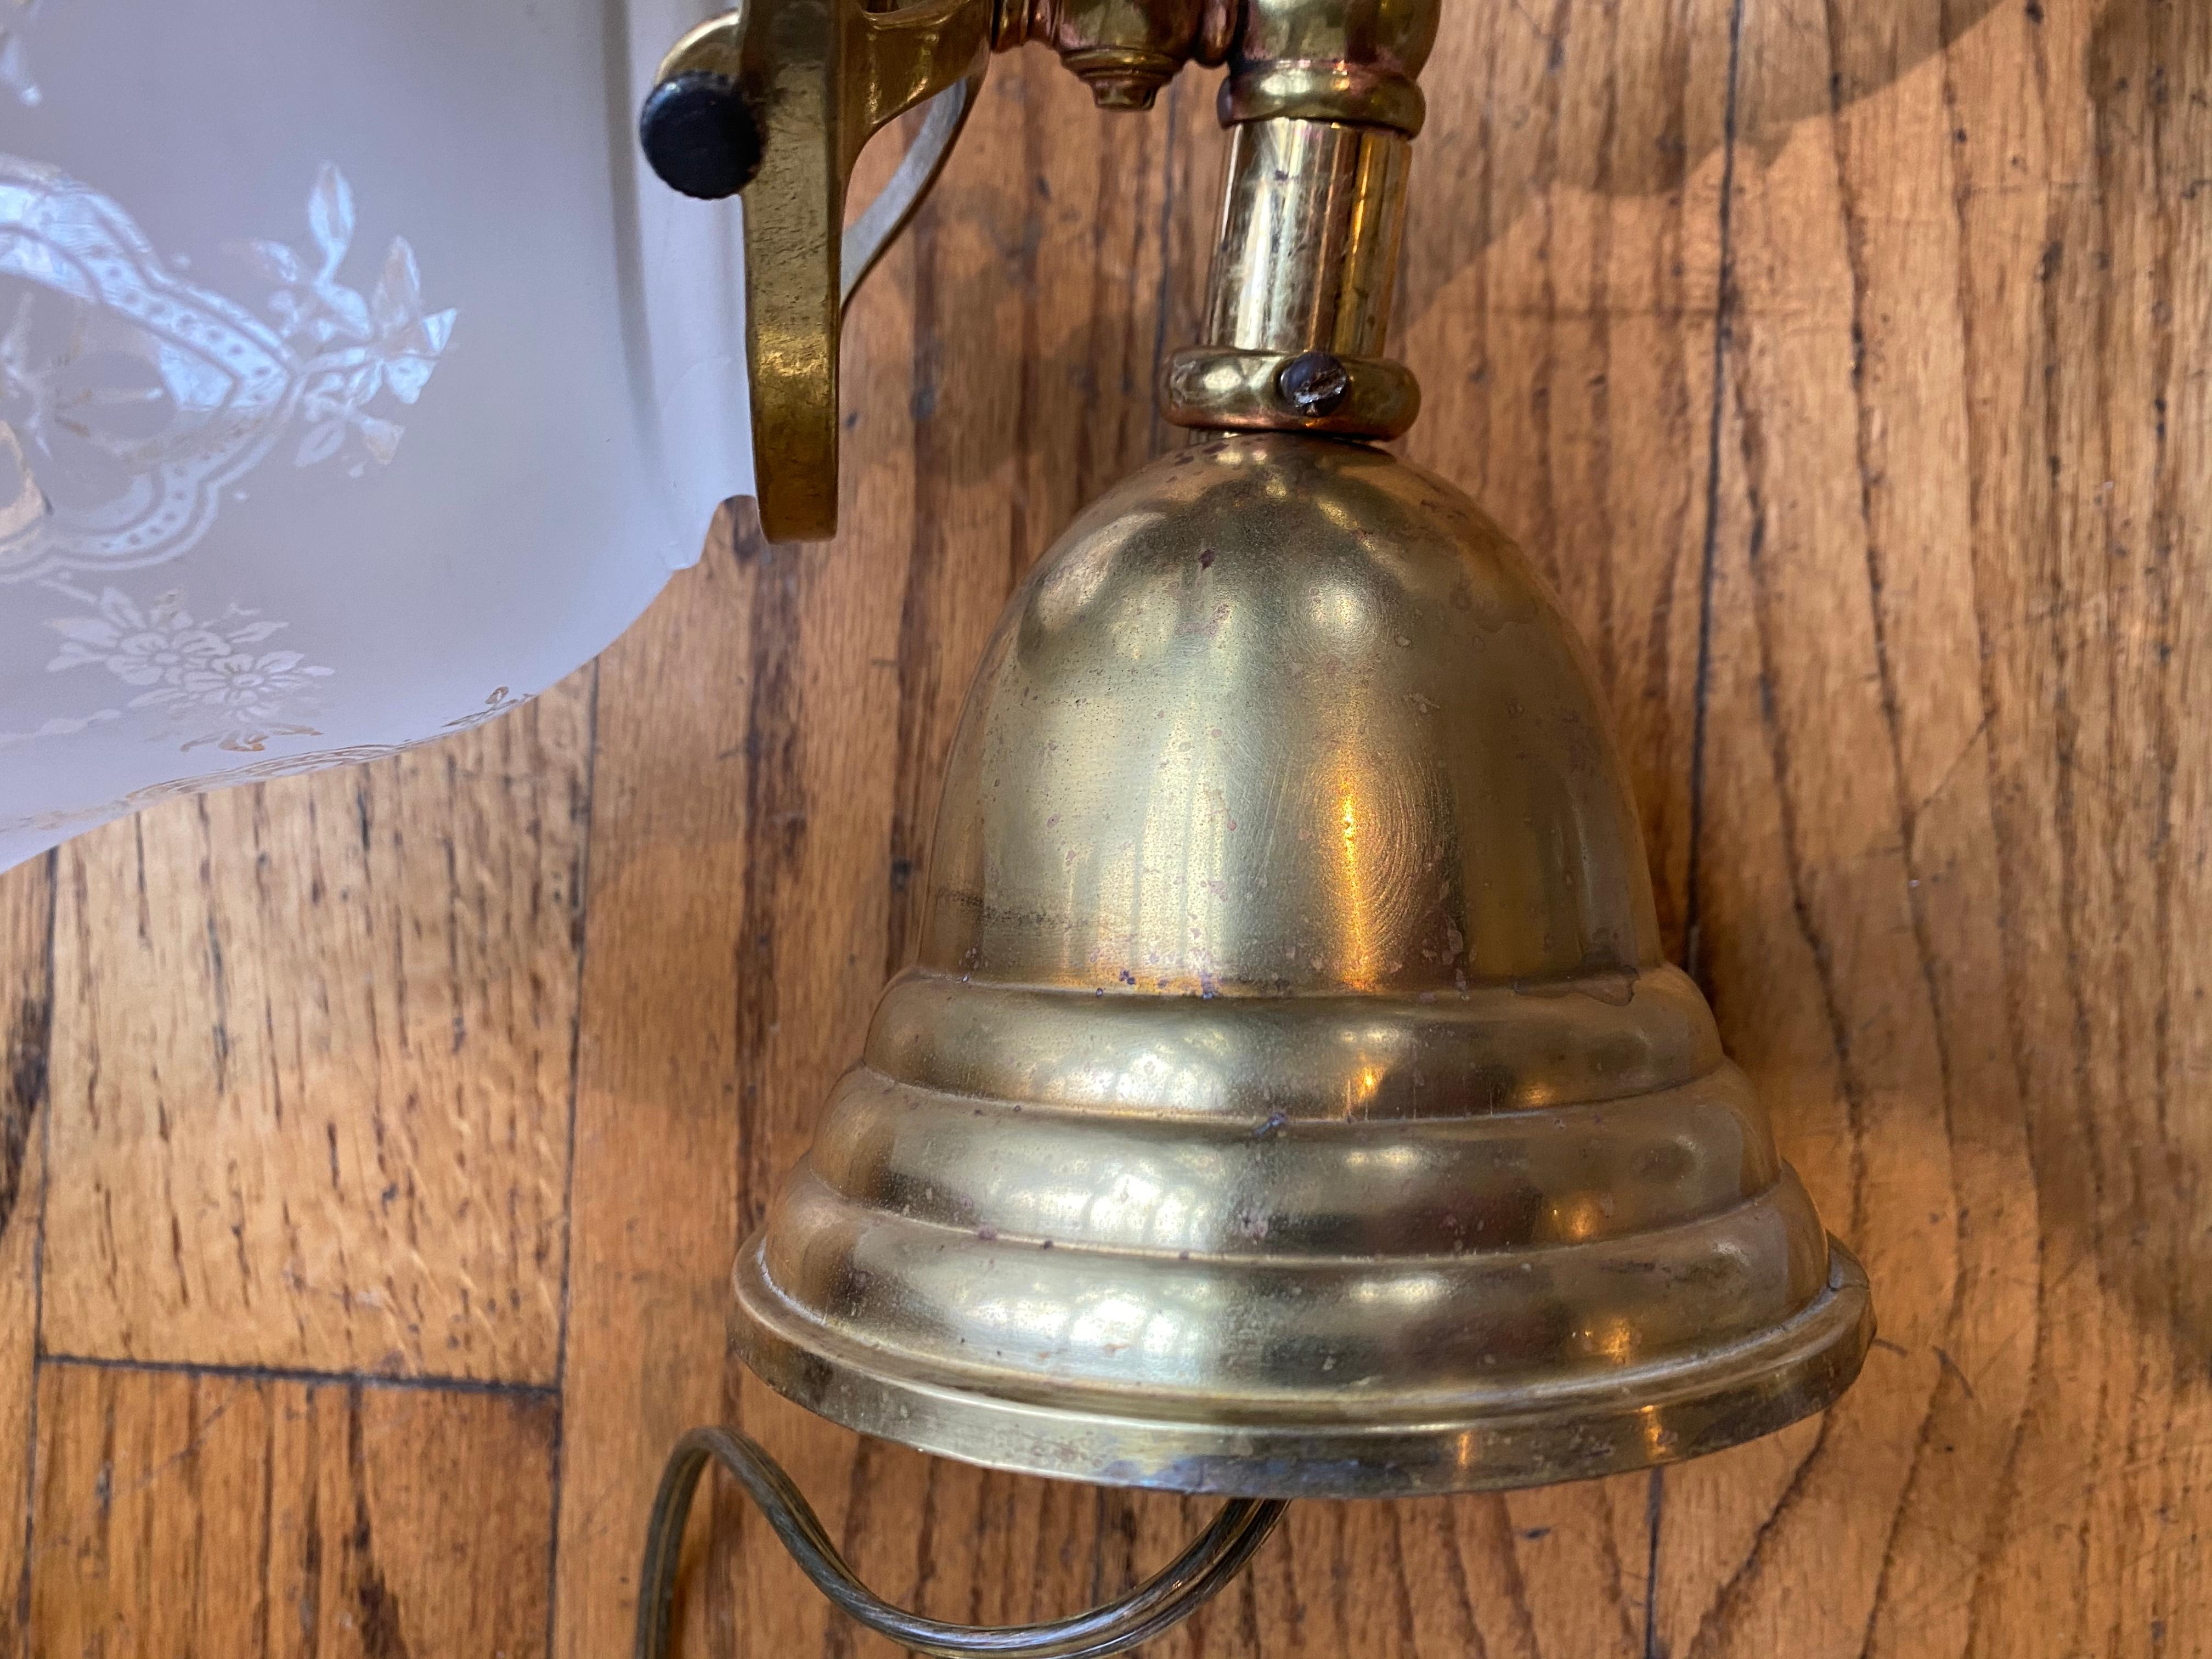 This is an unusual pair of vintage gas / electric wall sconces with vintage stencil etched shades. Rewired and ready to install. From a private connecticut collection. Early 1900s collection.
We ship everywhere. 